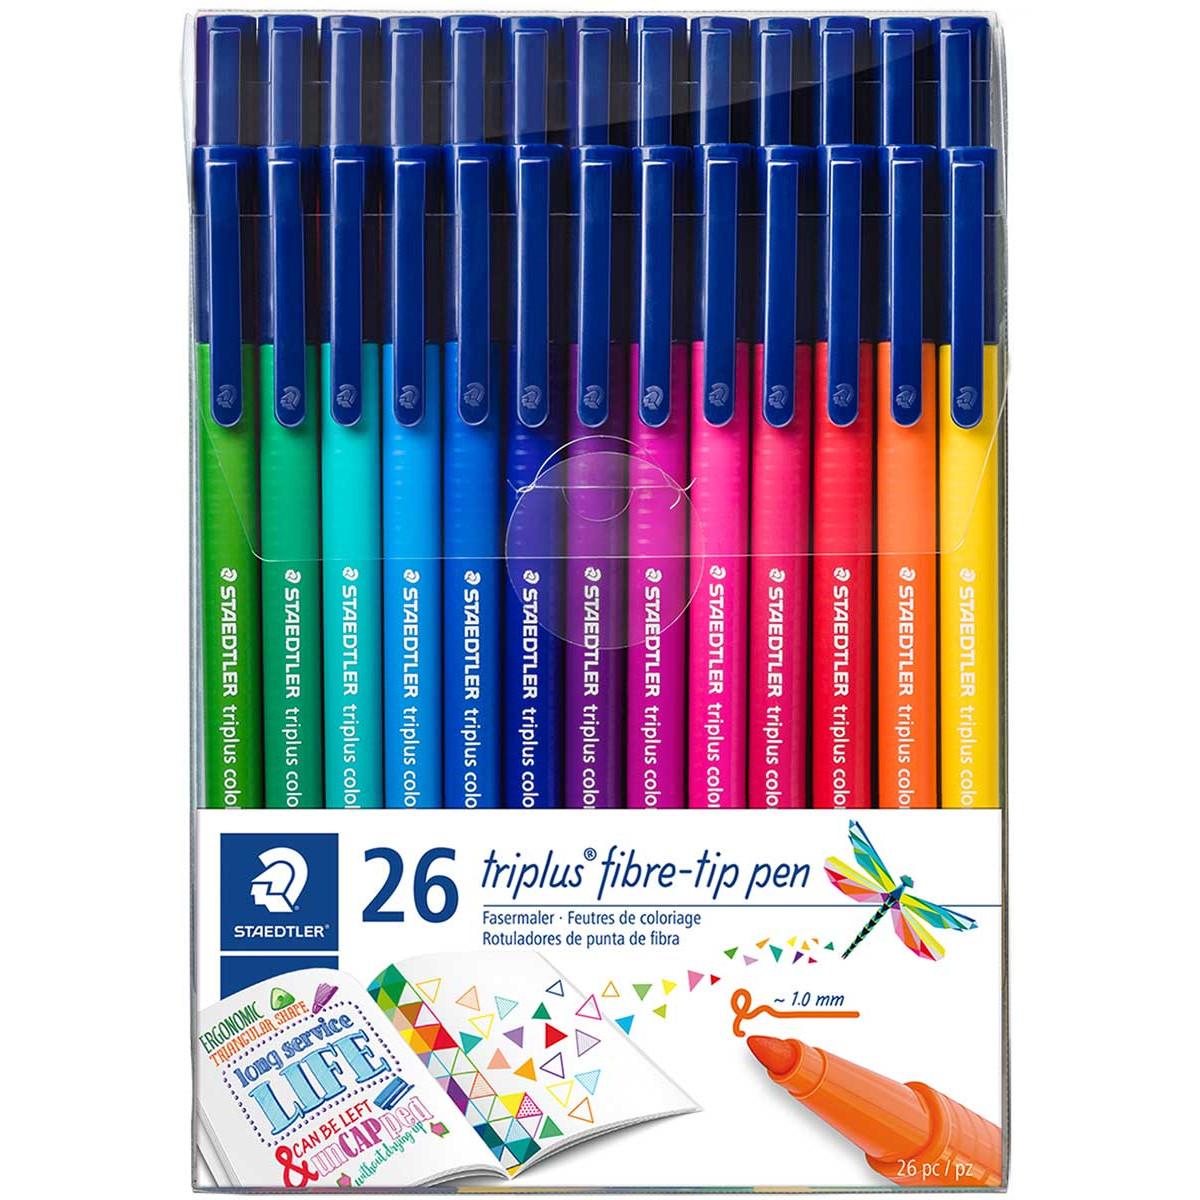 https://www.theonlinepencompany.com/cache/1210/staedtler/fibre-tip/323-TB26.jpg